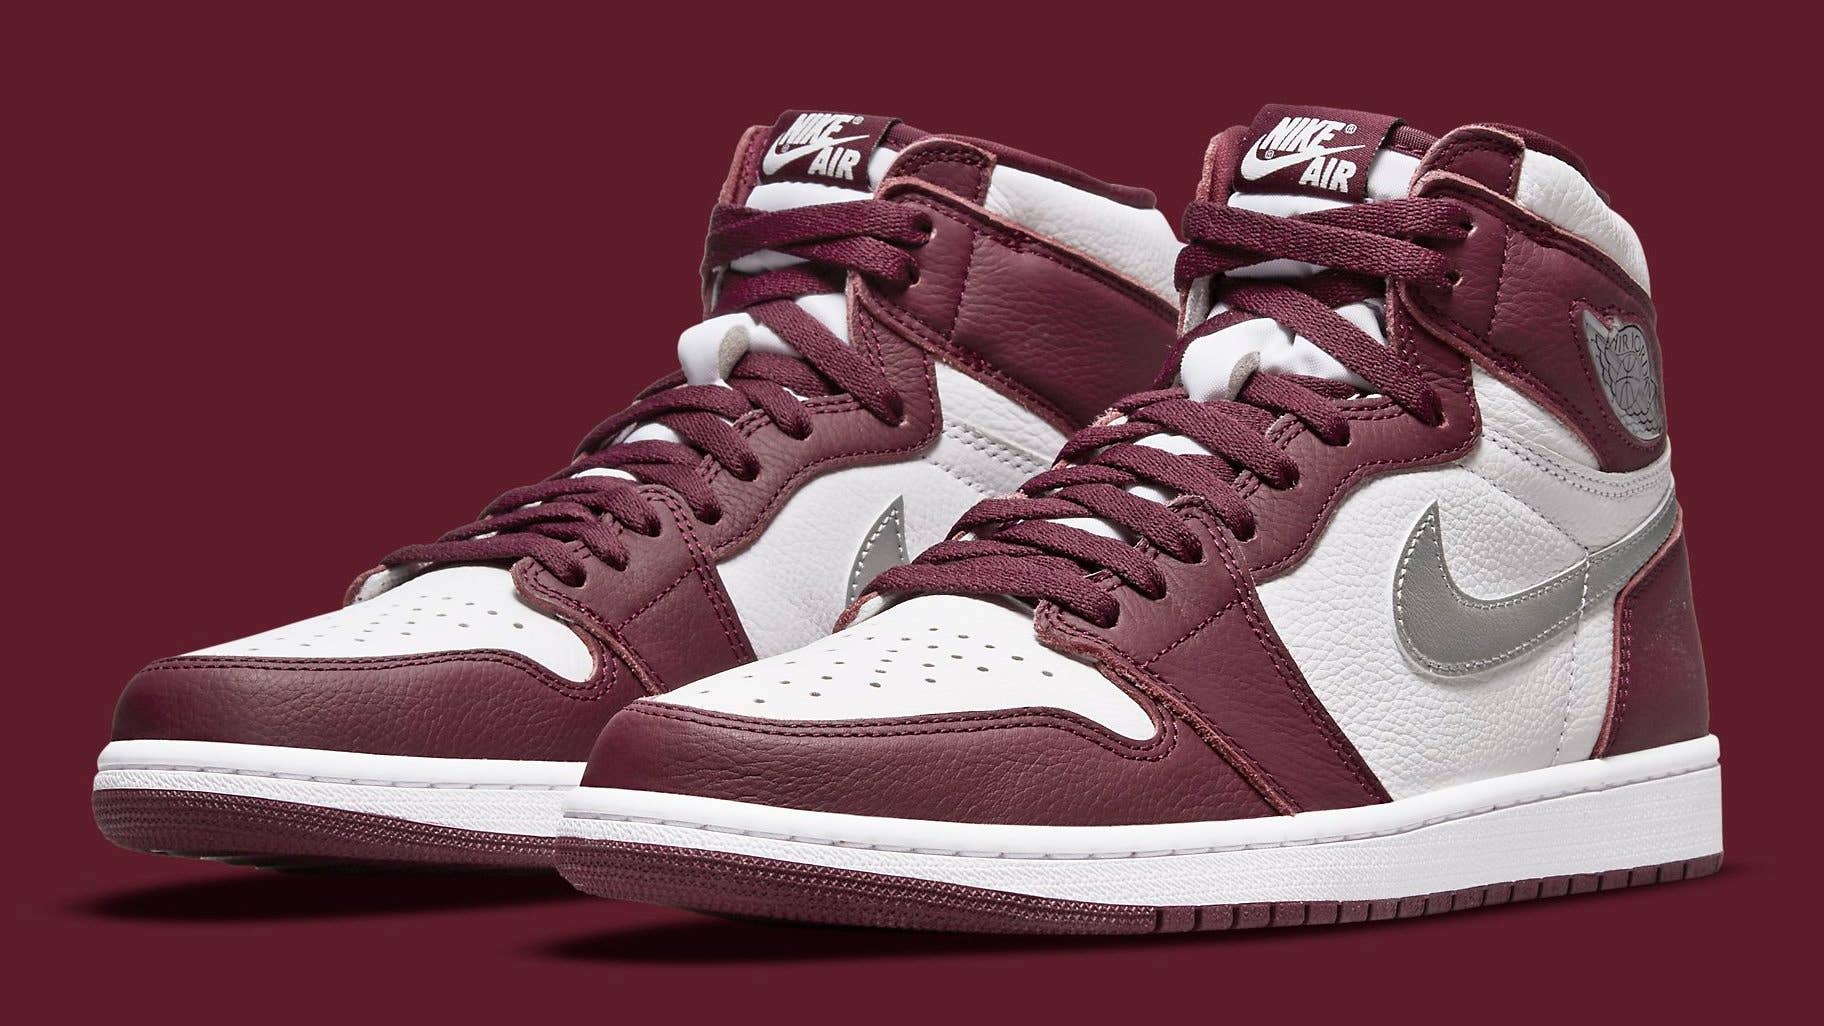 Betsy Trotwood Fifth brain Bordeaux' Air Jordan 1 Highs Set to Drop This Month | Complex